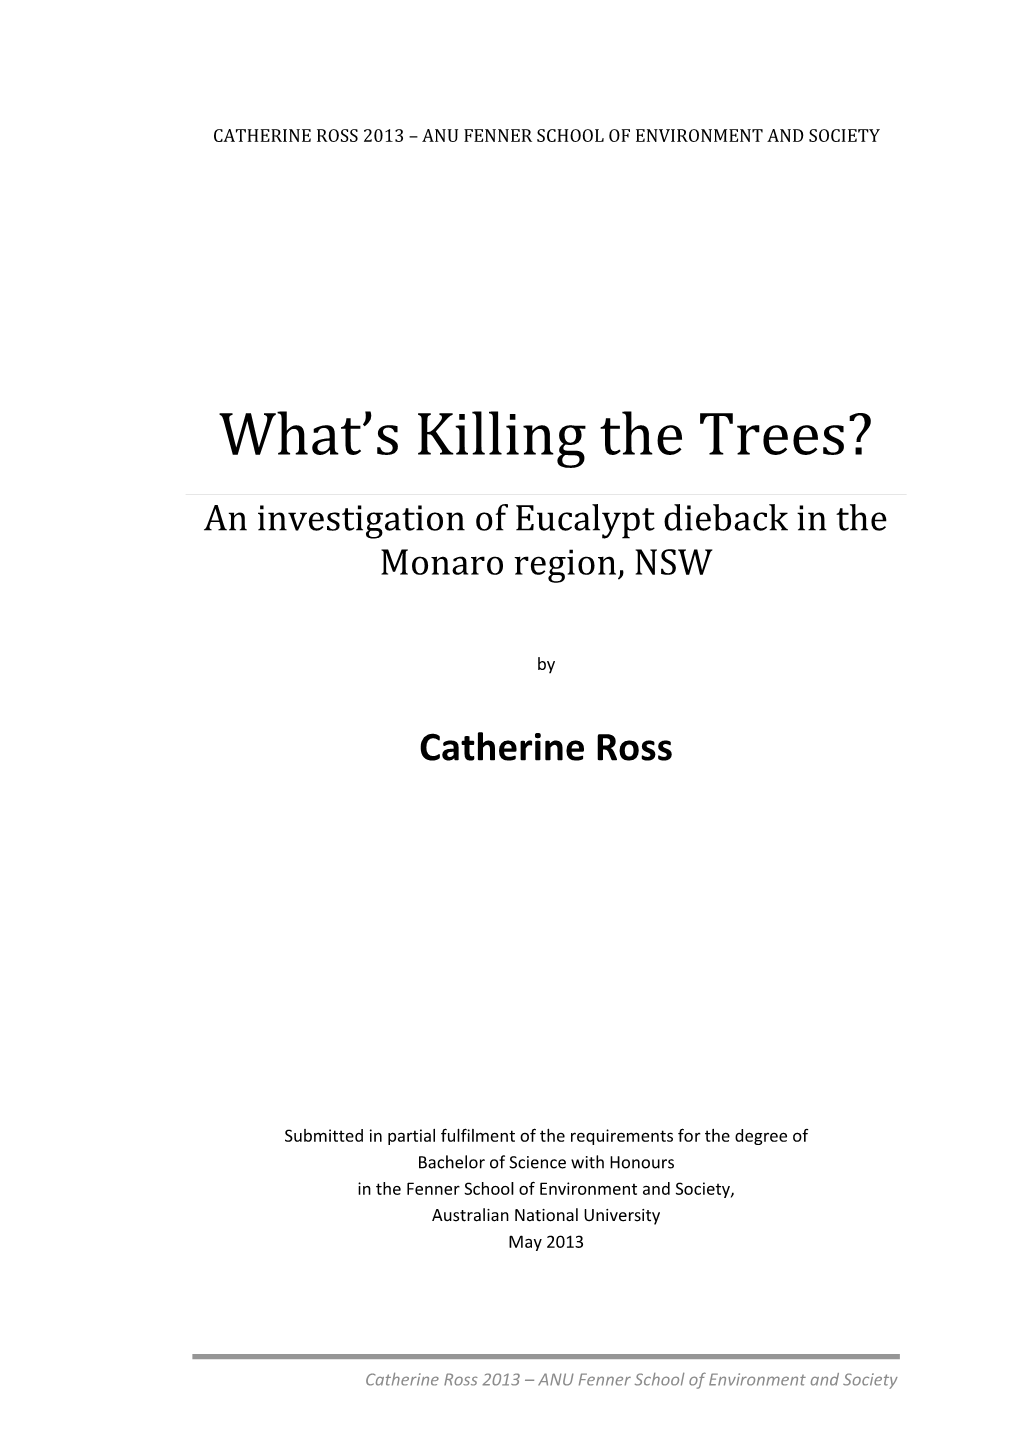 What's Killing the Trees – an Investigation of Eucalypt Dieback in the Monaro Region